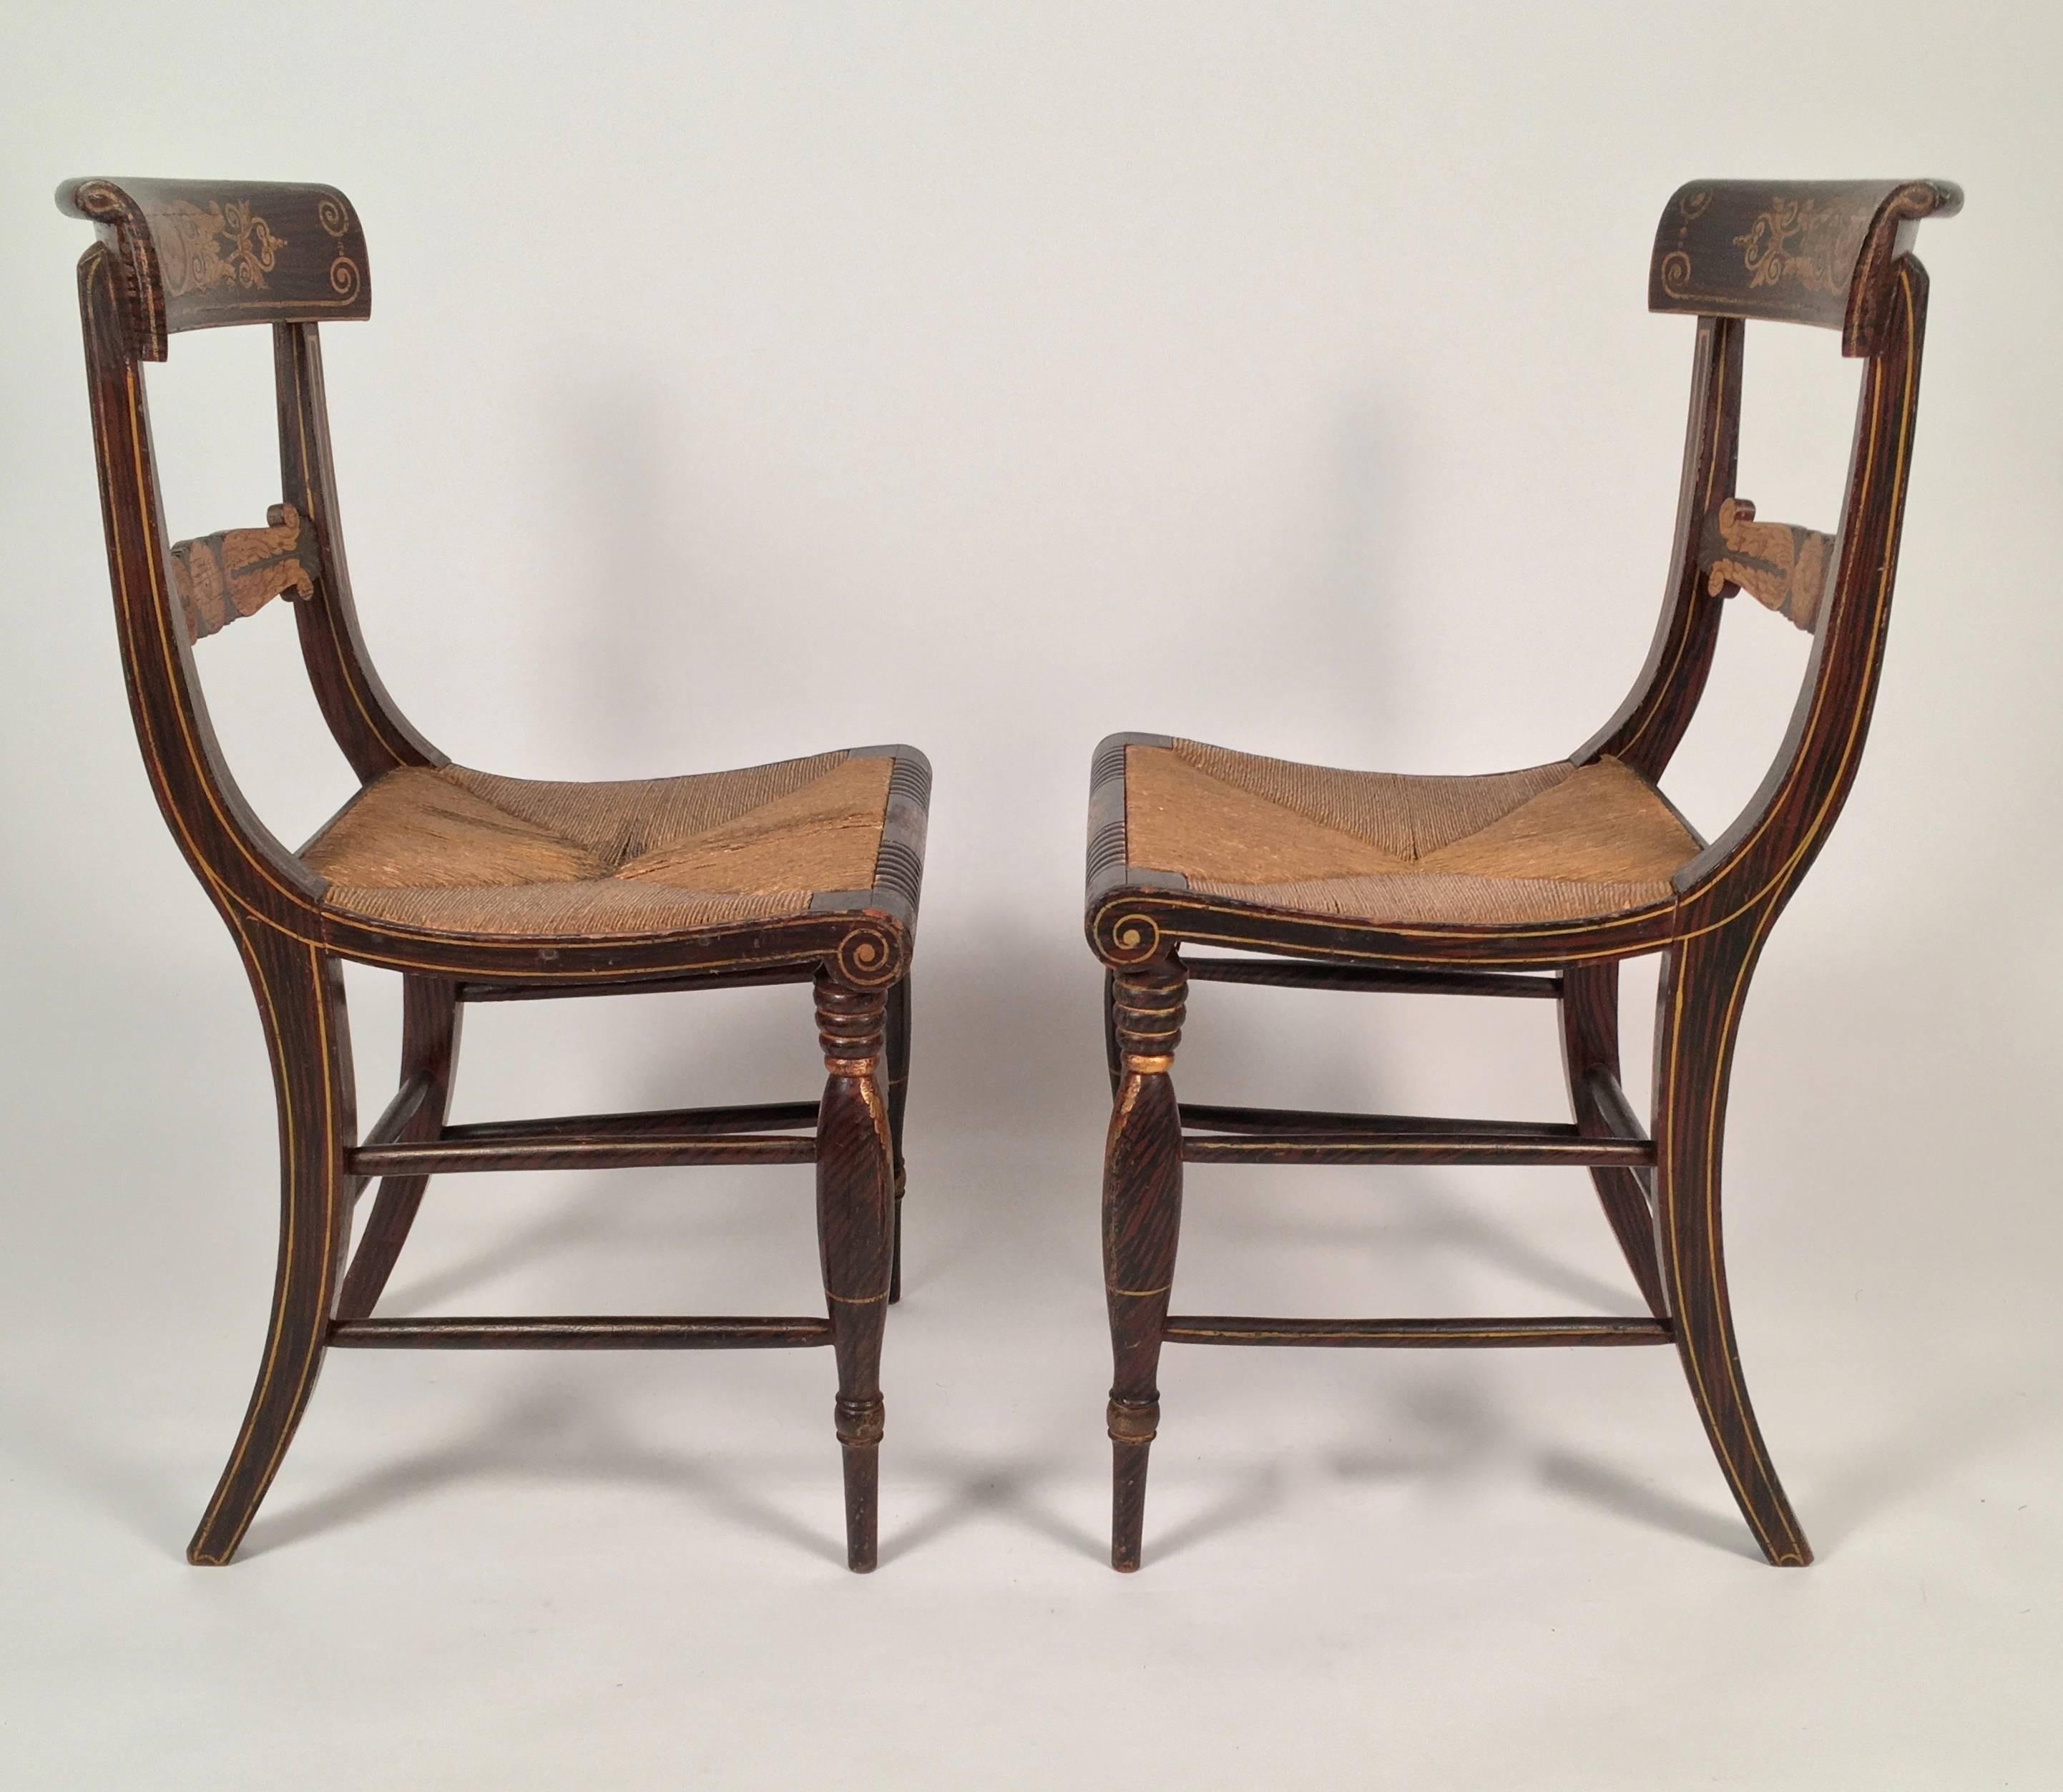 A pair of Federal period neoclassical fancy painted Klismos chairs, retaining their original stenciled gilded decoration, depicting rosettes, anthemion, acanthus leaves, scrolled and pinstripe decoration over grain painted rosewood, with rush seats